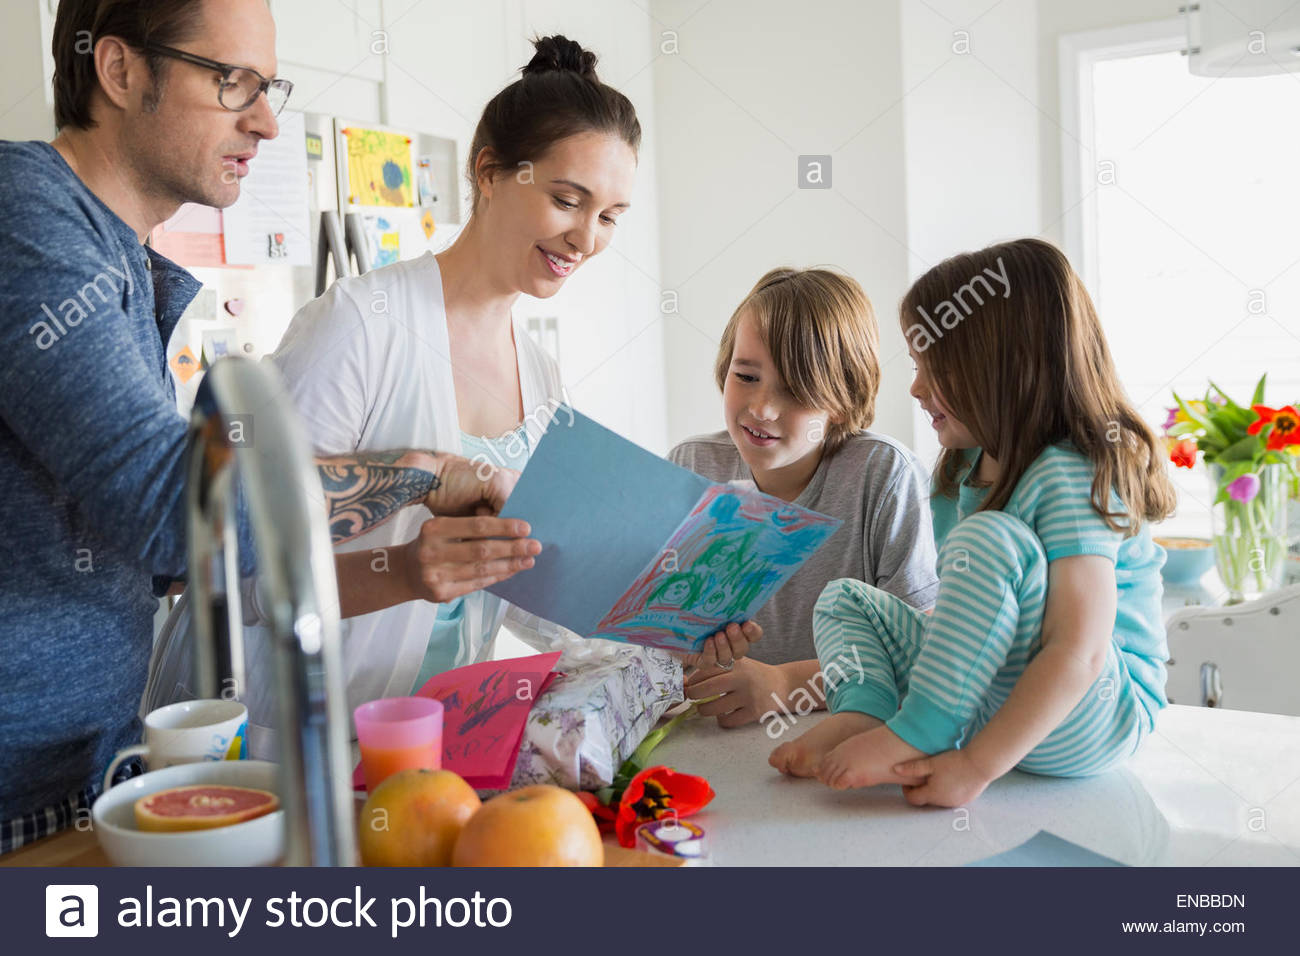 Family watching mother read homemade Mothers Day card Stock Photo